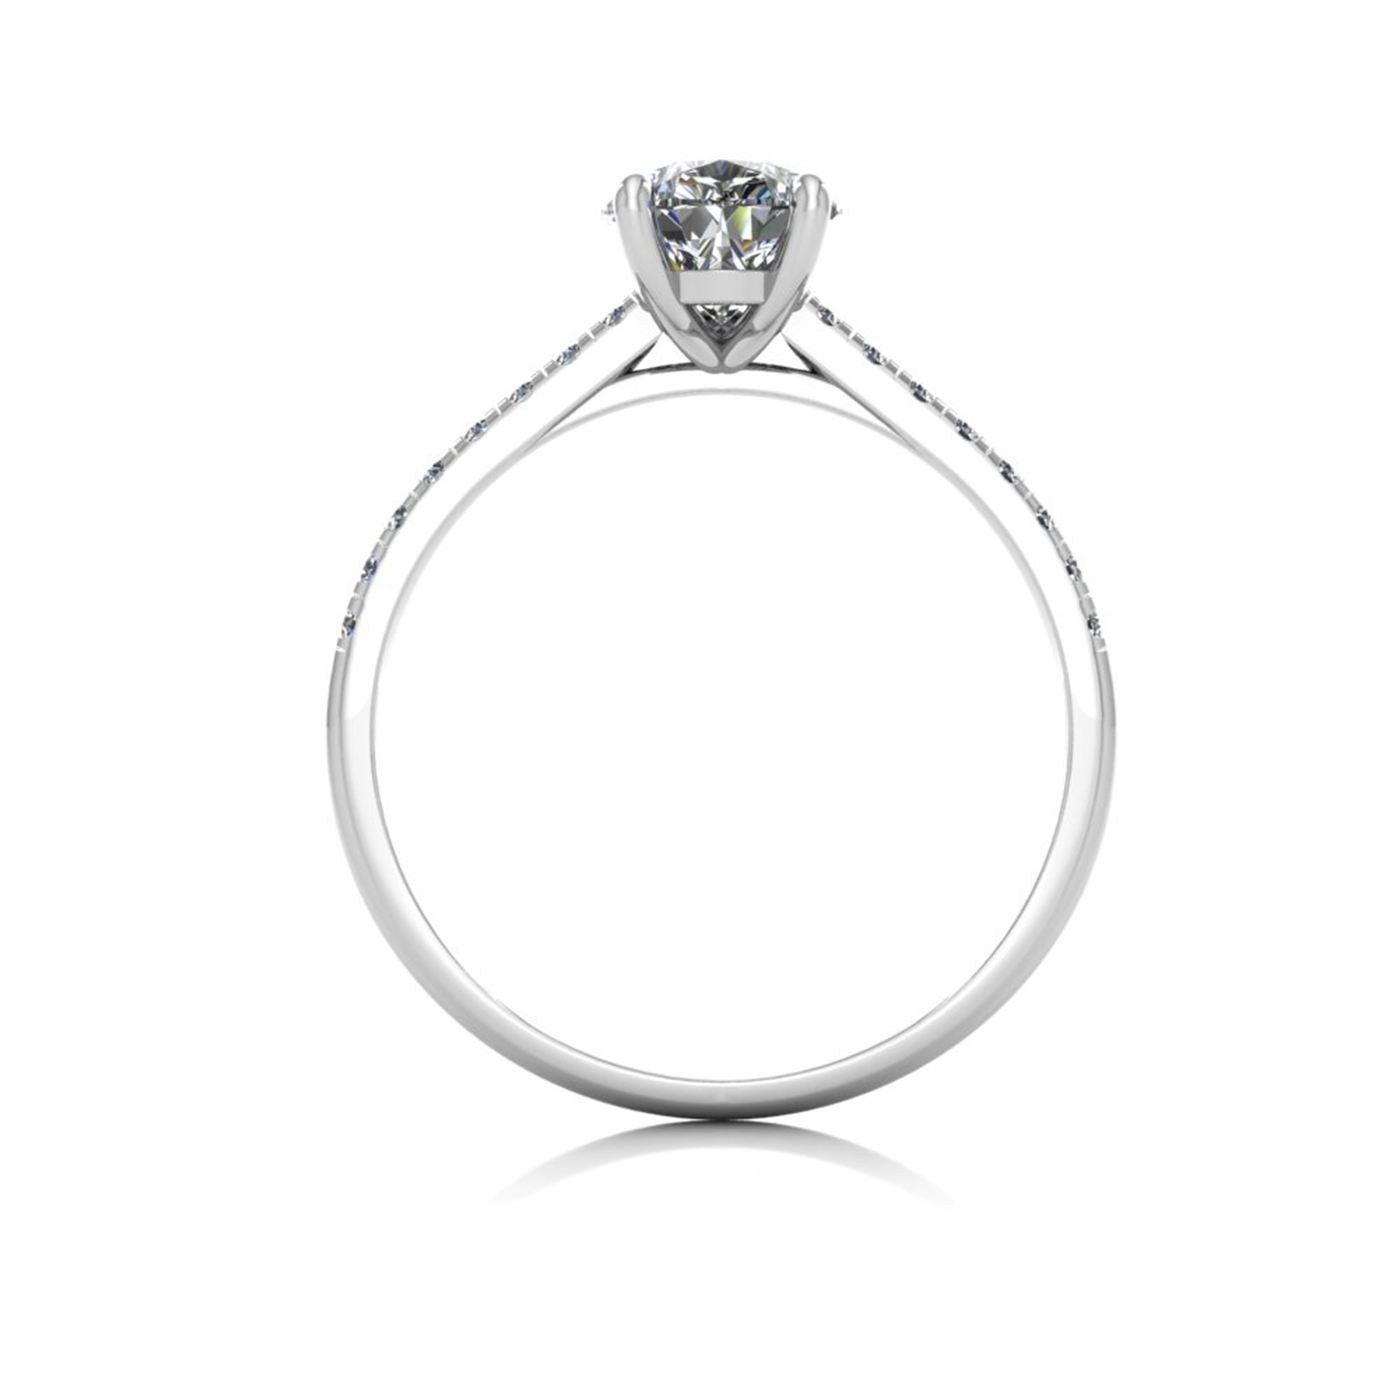 18k white gold 1.2ct 3 prongs pear diamond engagement ring with whisper thin pavÉ set band